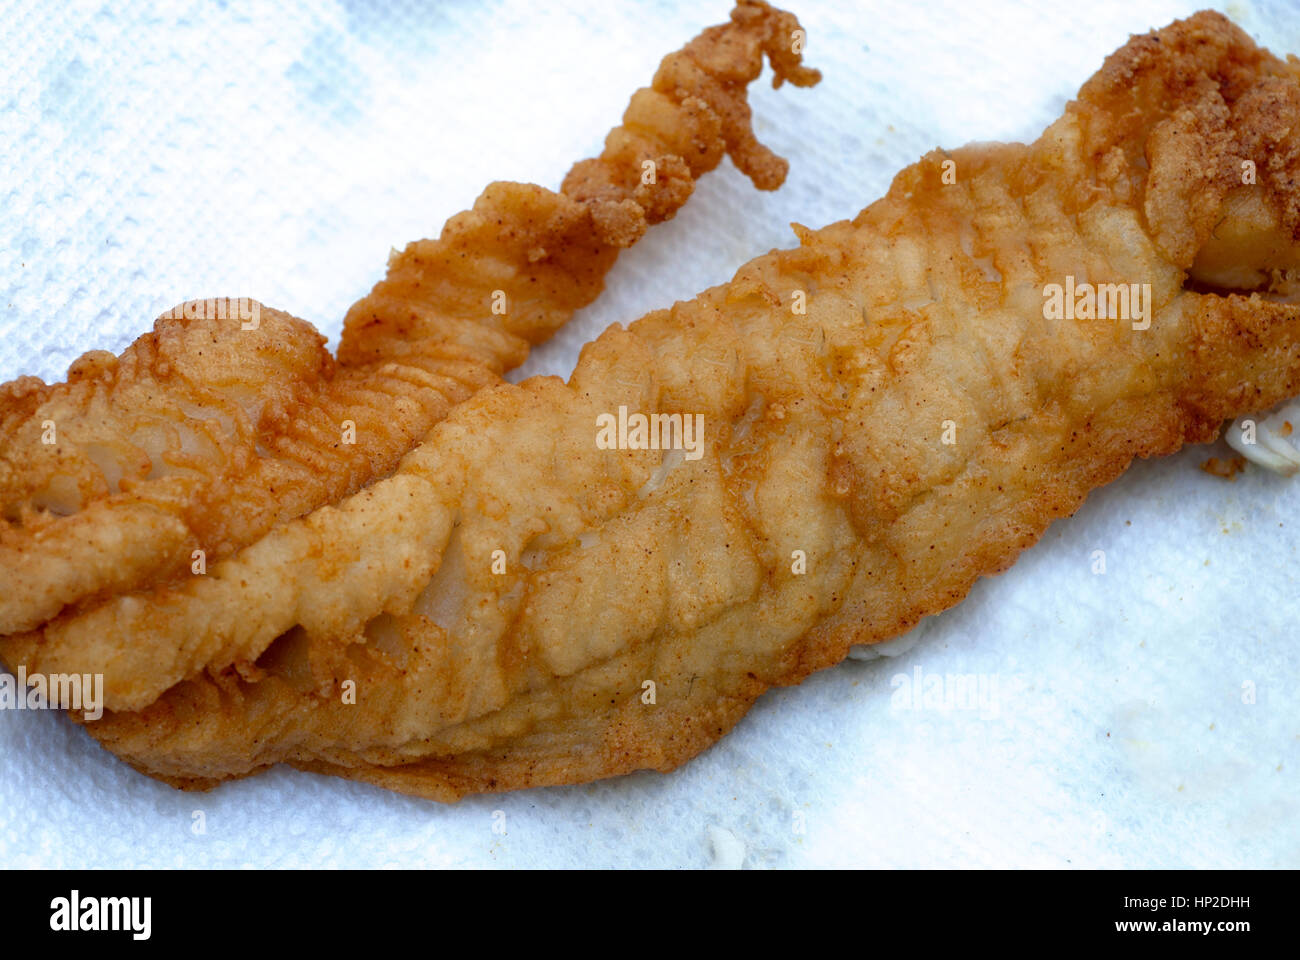 deep fried fish on paper towl Stock Photo